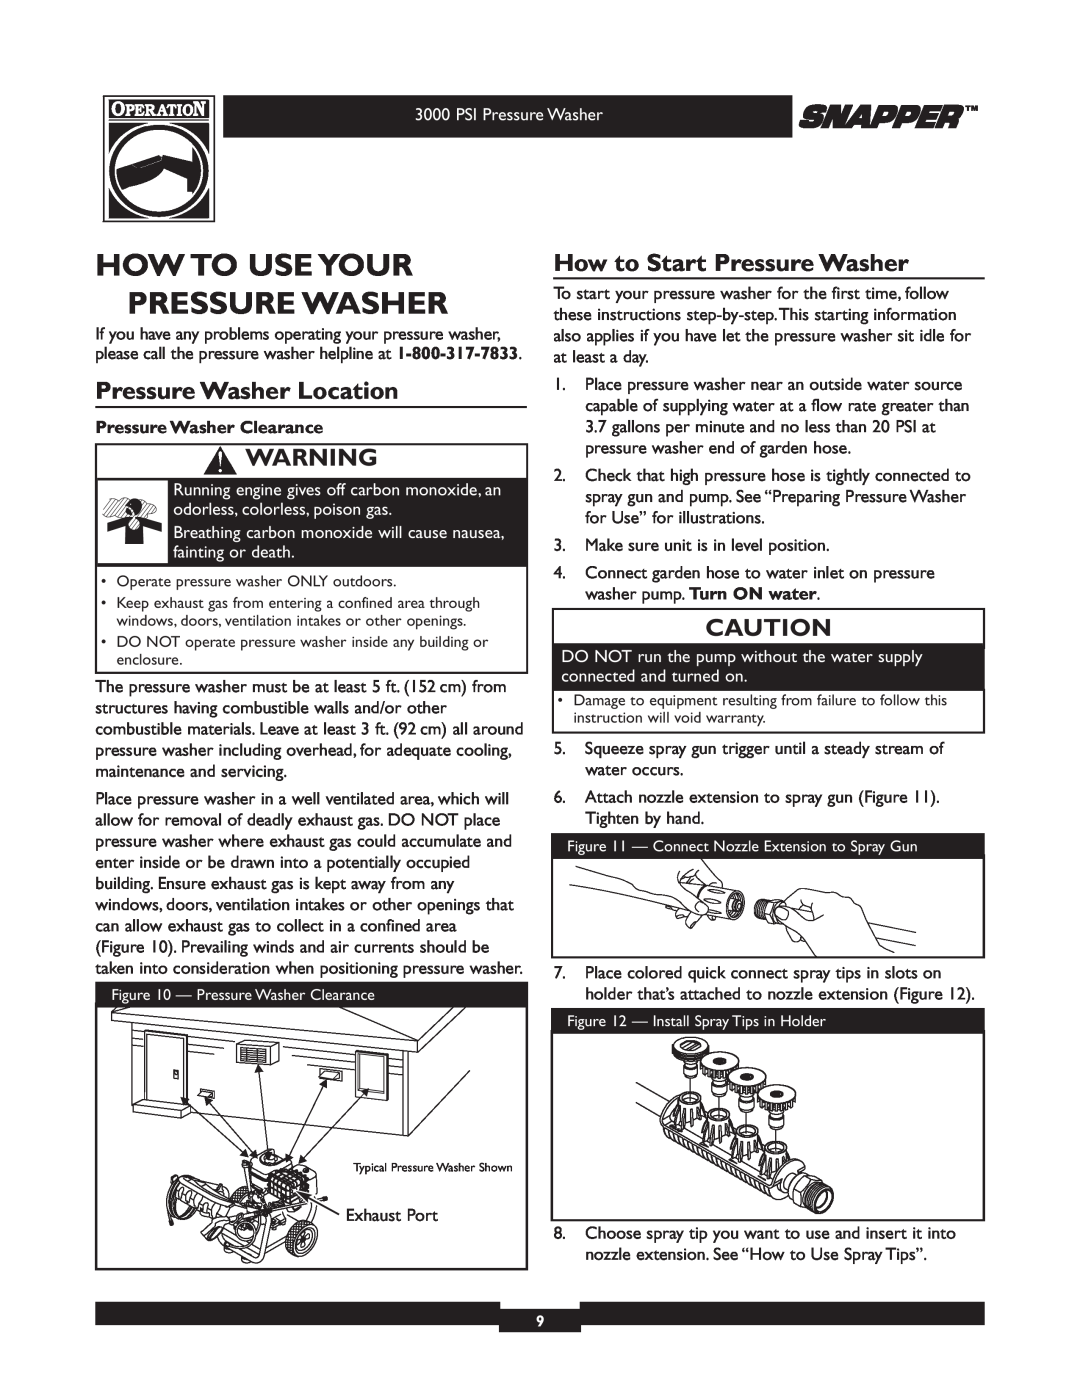 Snapper 020231 owner manual How To Use Your Pressure Washer, Pressure Washer Location, How to Start Pressure Washer 